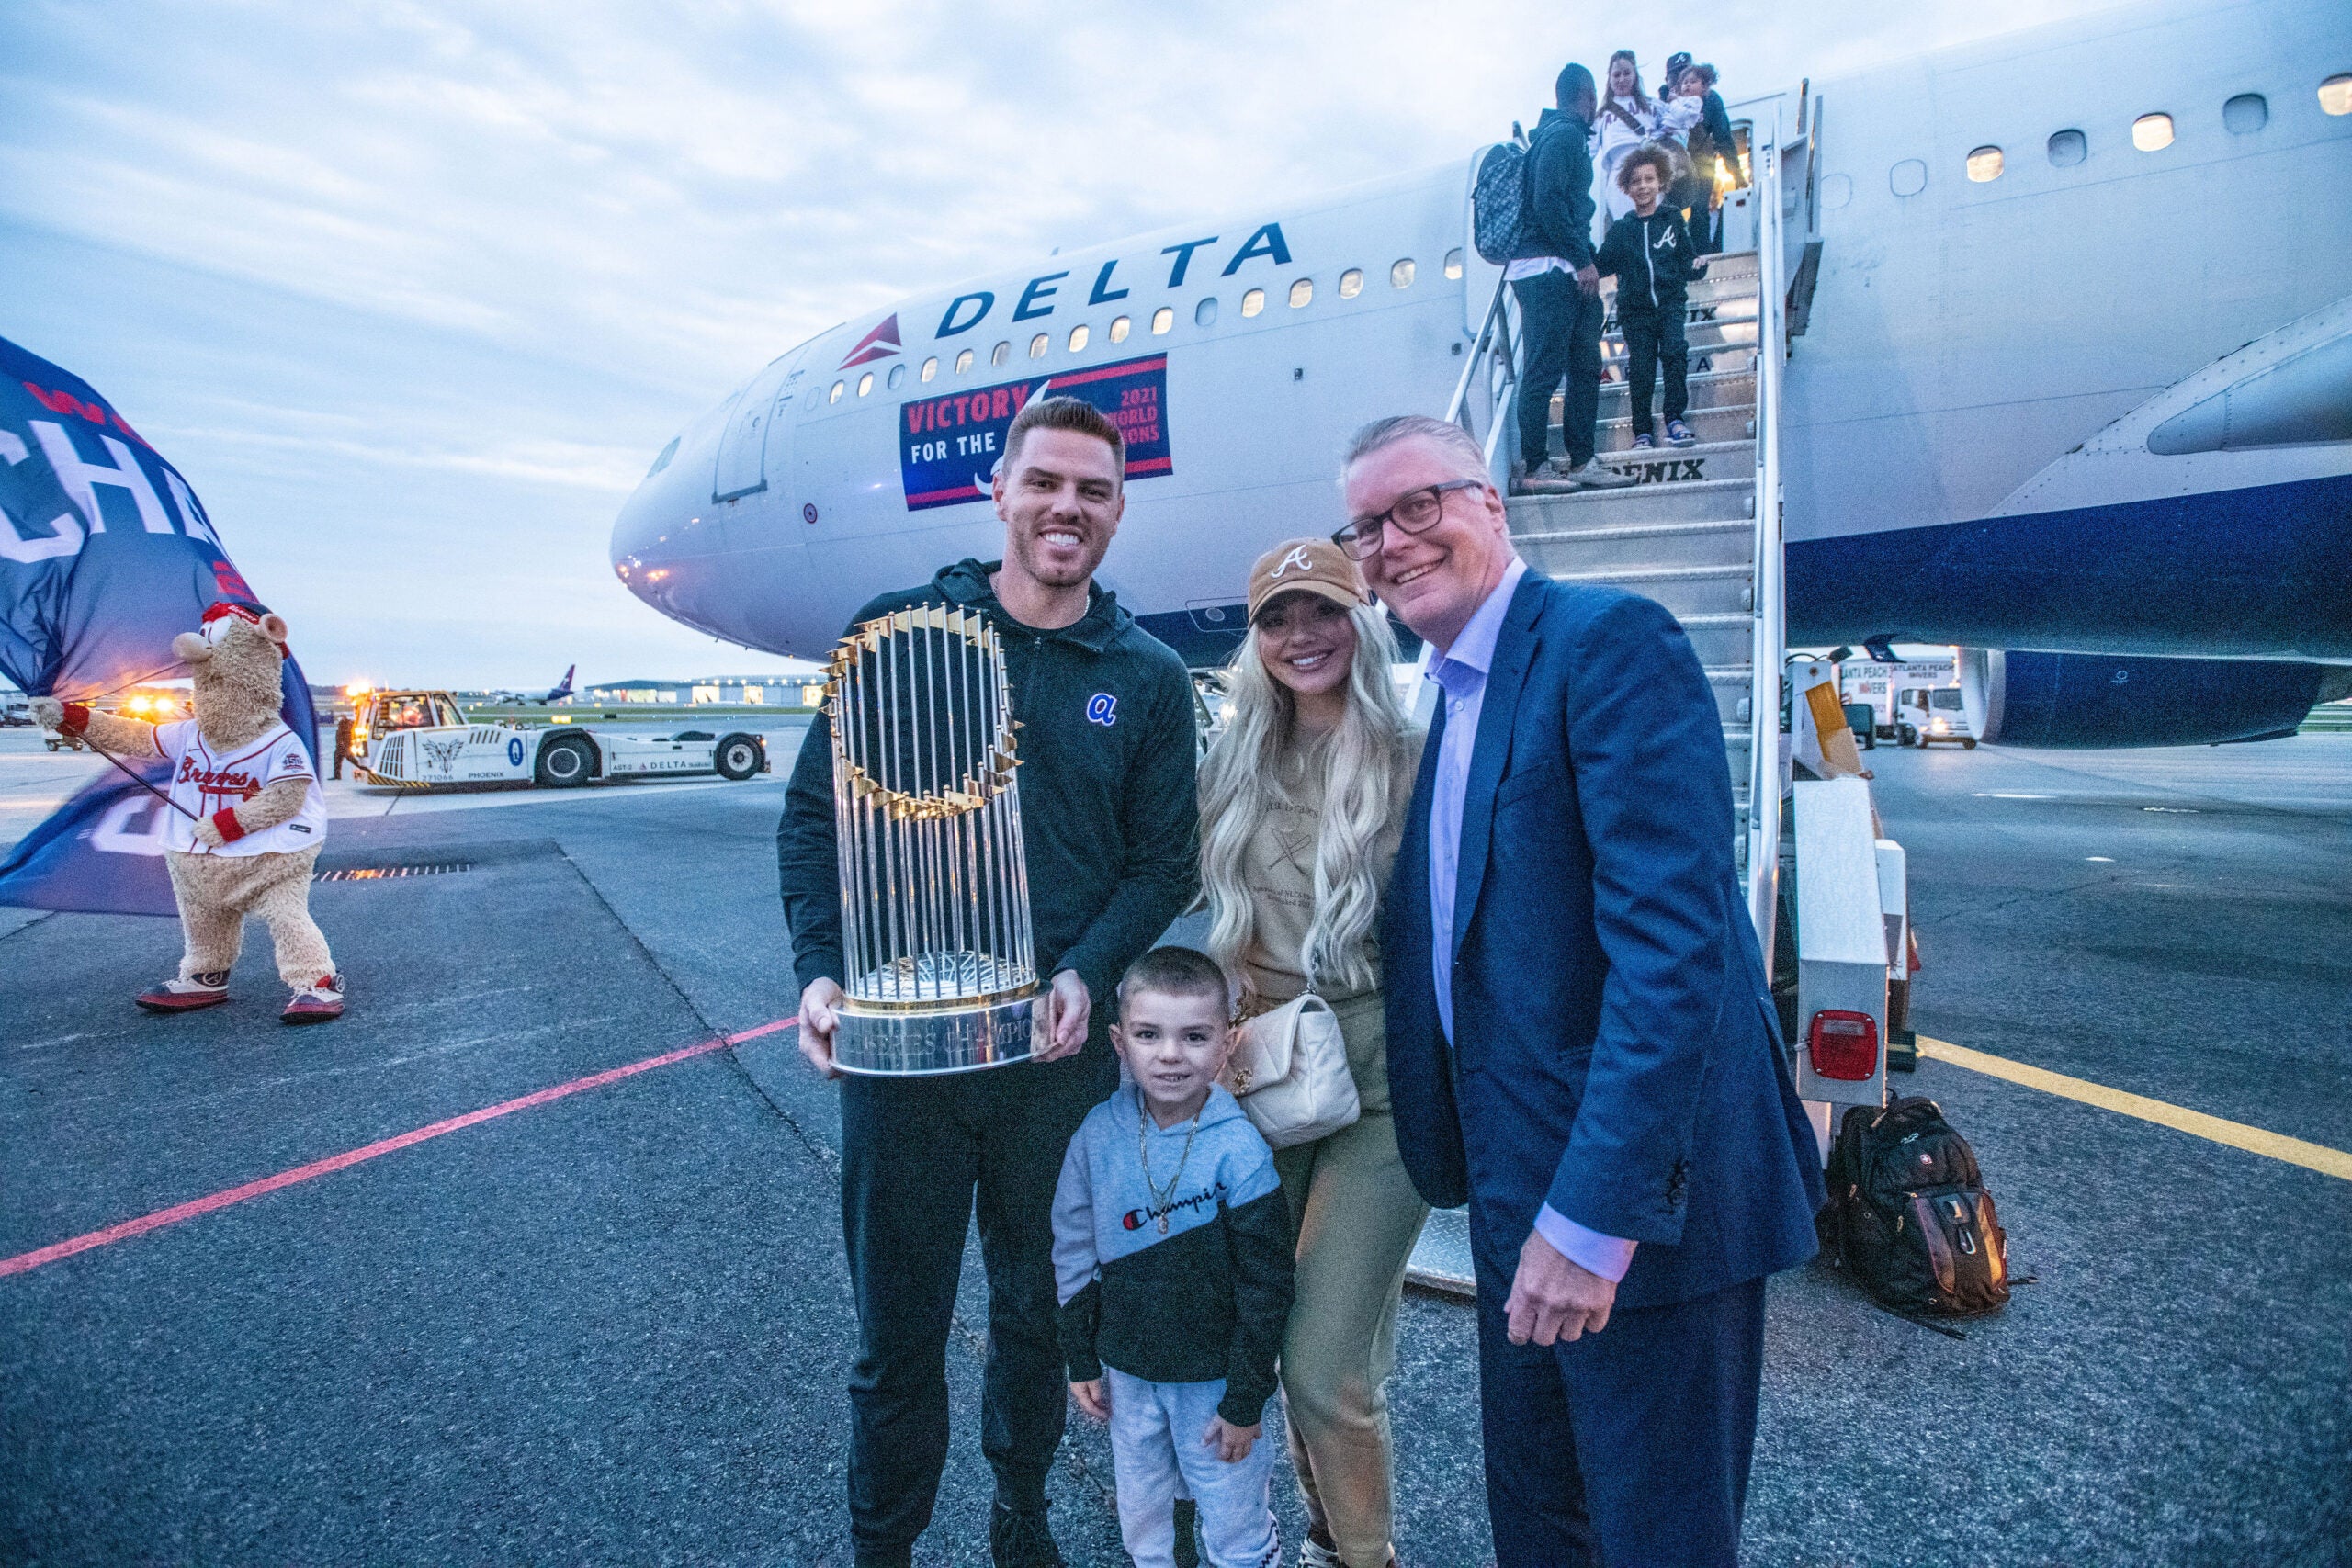 Atlanta Braves boost Delta's latest claim 'The grand slam of carrying